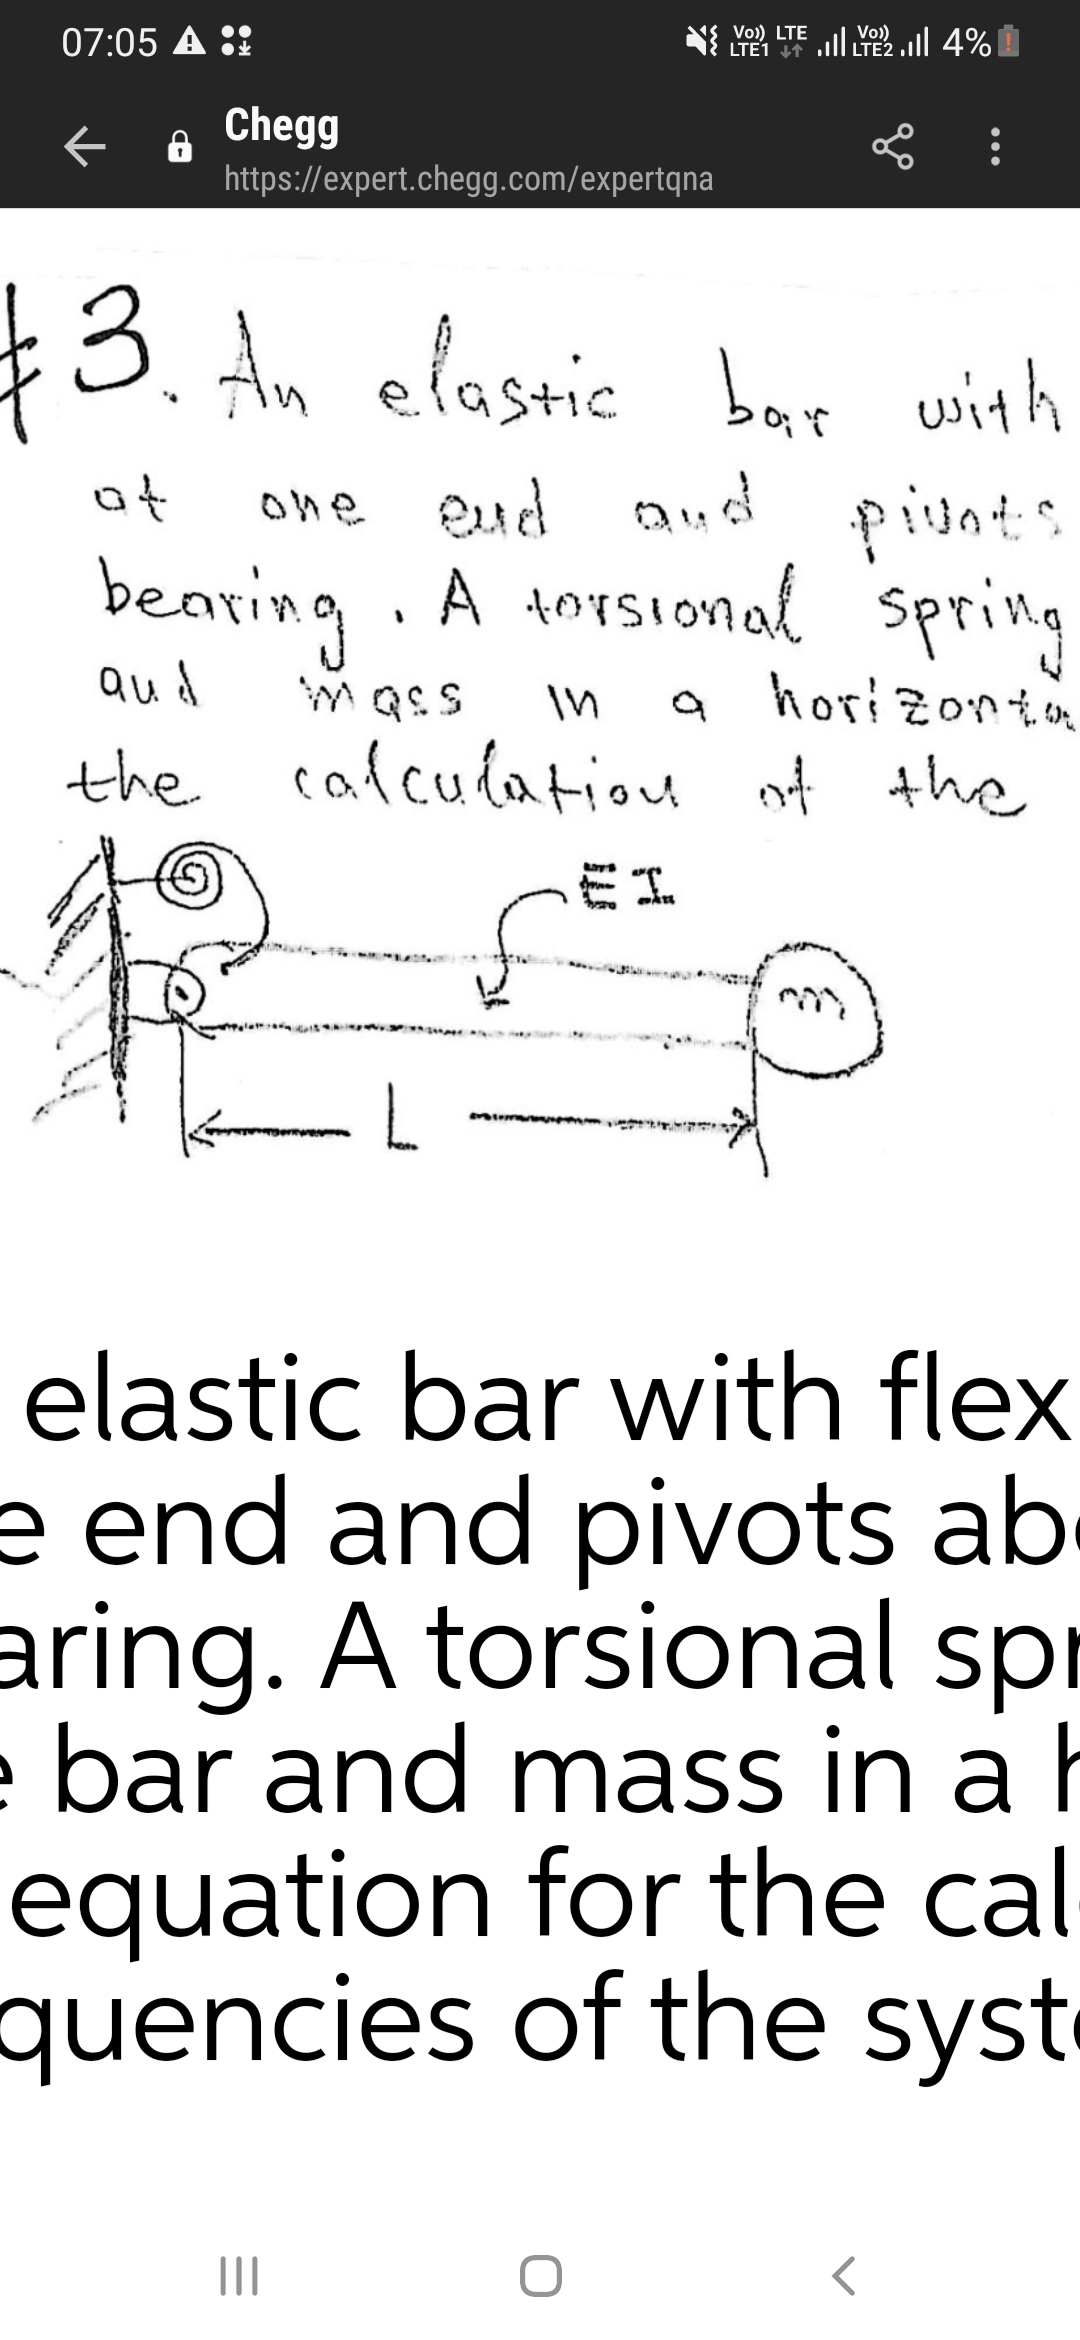 07:05 A ::
LTE1 ll LTE2 .ll 4%
Vo)) LTE
Vo)
Chegg
https://expert.chegg.com/expertqna
$3.
Am elastic bar with
at
one eud aud pivnt:
bearing A torsional spring
spring
Qud
horizonta
the cafculatiou of the
Eエ
mm ue
elastic bar with flex
e end and pivots ab
aring. A torsional spr
e bar and mass in a h
equation for the cal
quencies of the syst
II
..
